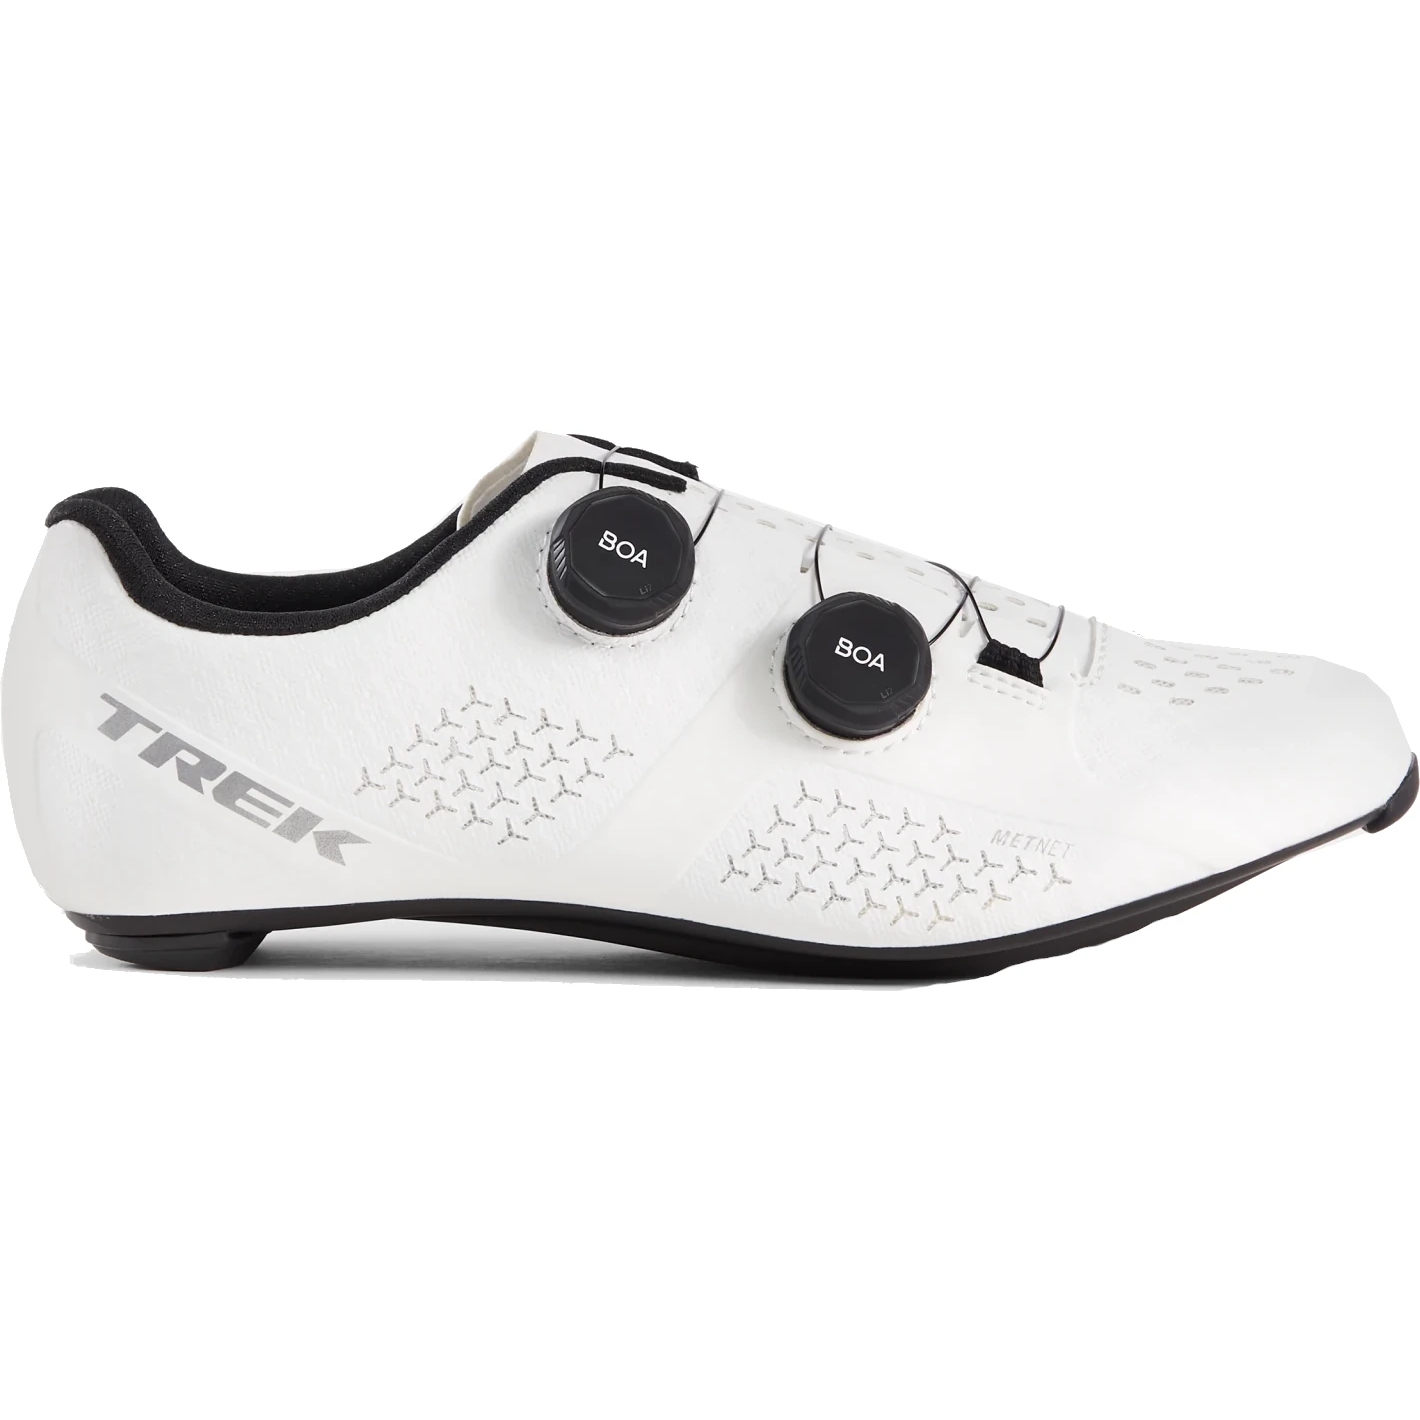 Picture of Trek Velocis Road Cycling Shoes - White